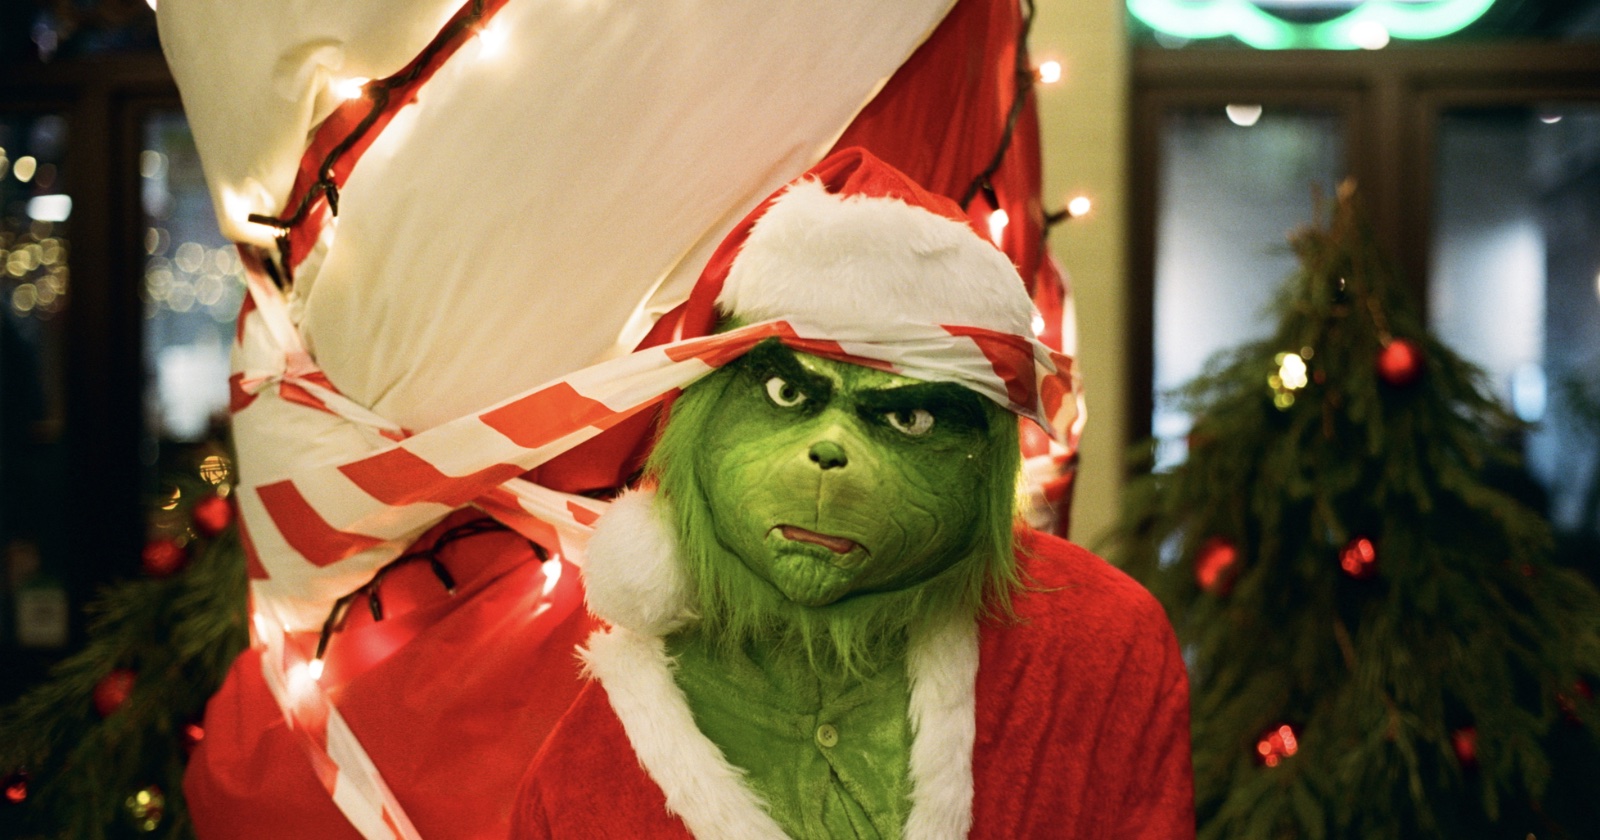 Photographers Warned They Could Be Sued for Grinch-Themed Shoots